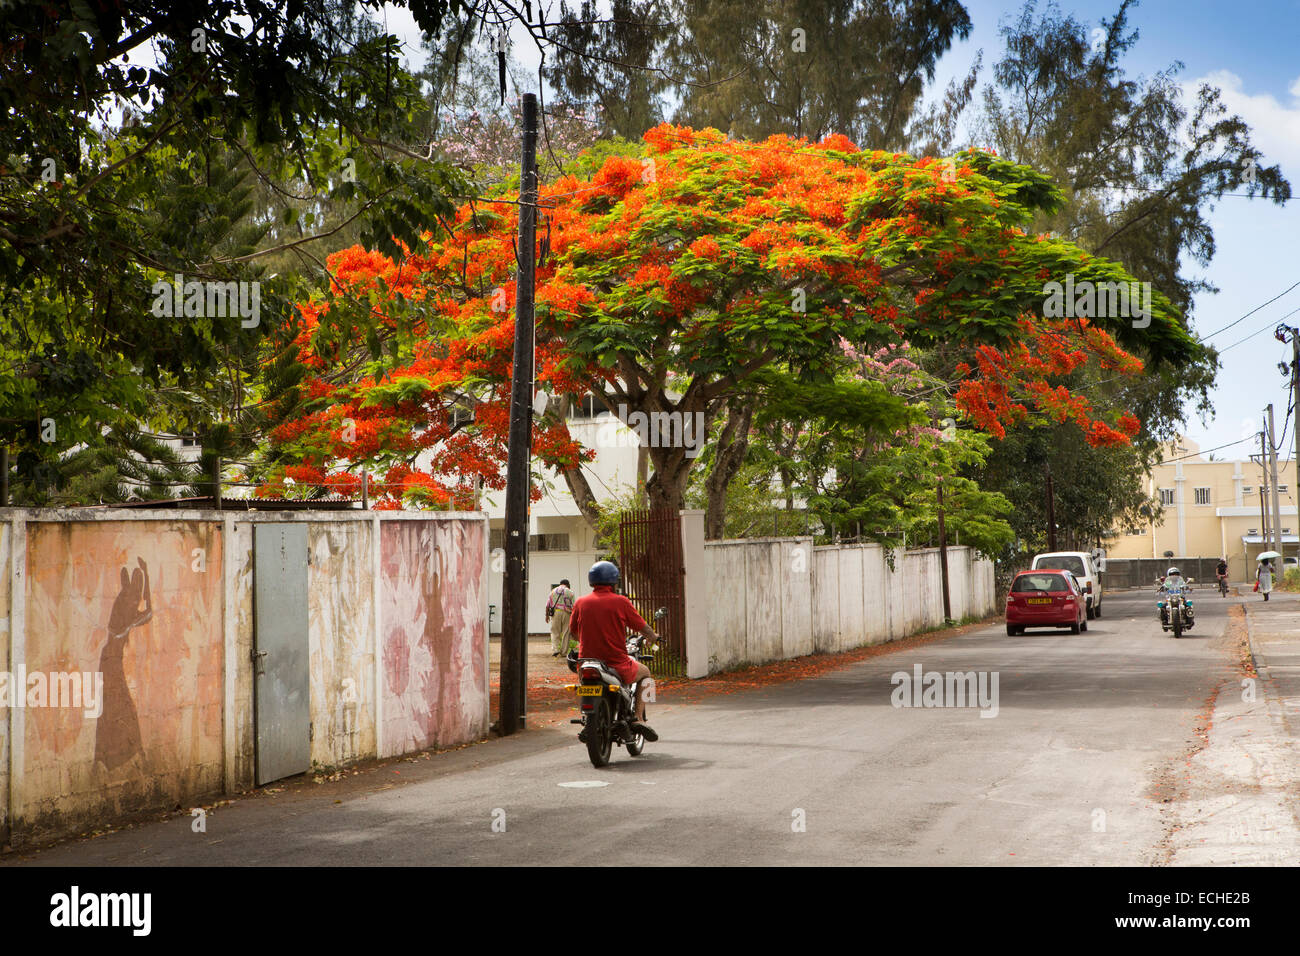 Mauritius, Mahebourg, flame tree in garden hanging over road Stock Photo